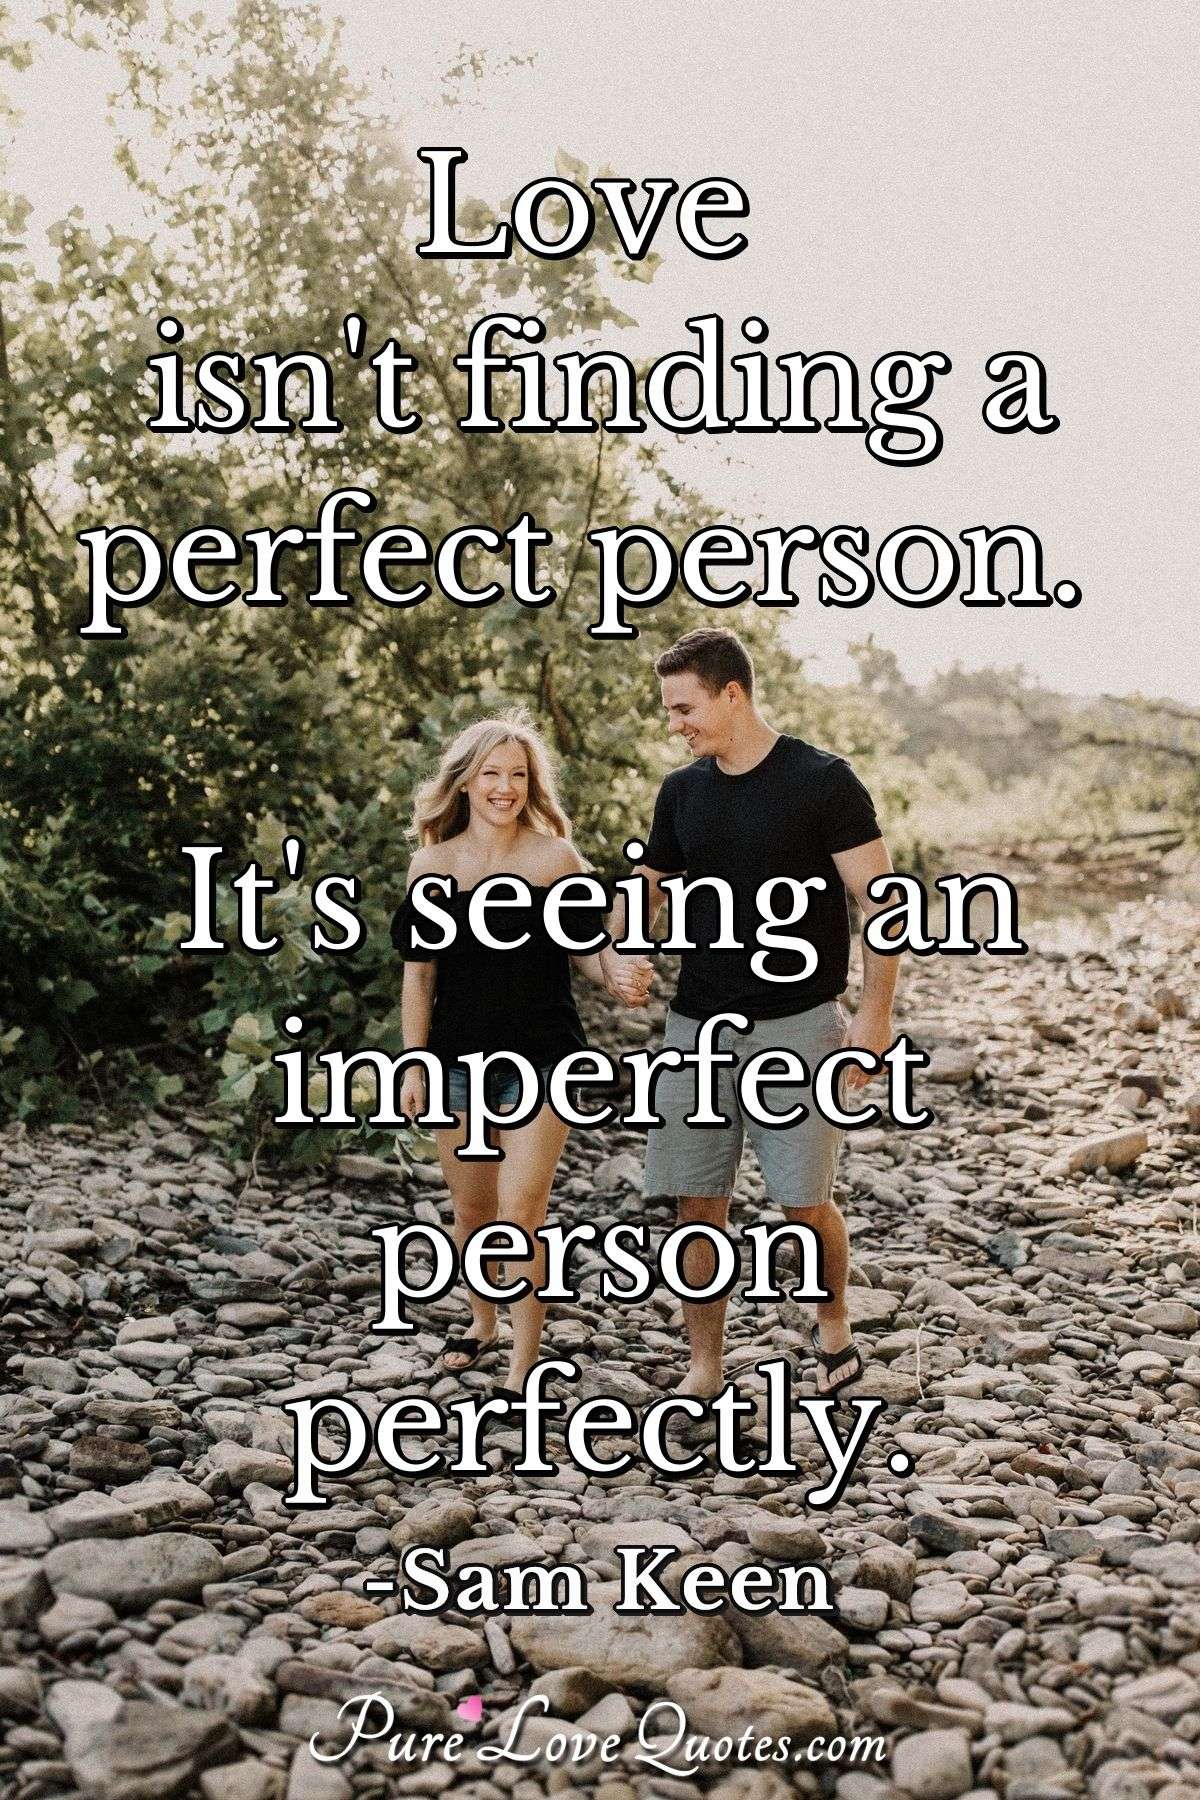 Love isn't finding a perfect person. It's seeing an imperfect person  perfectly.